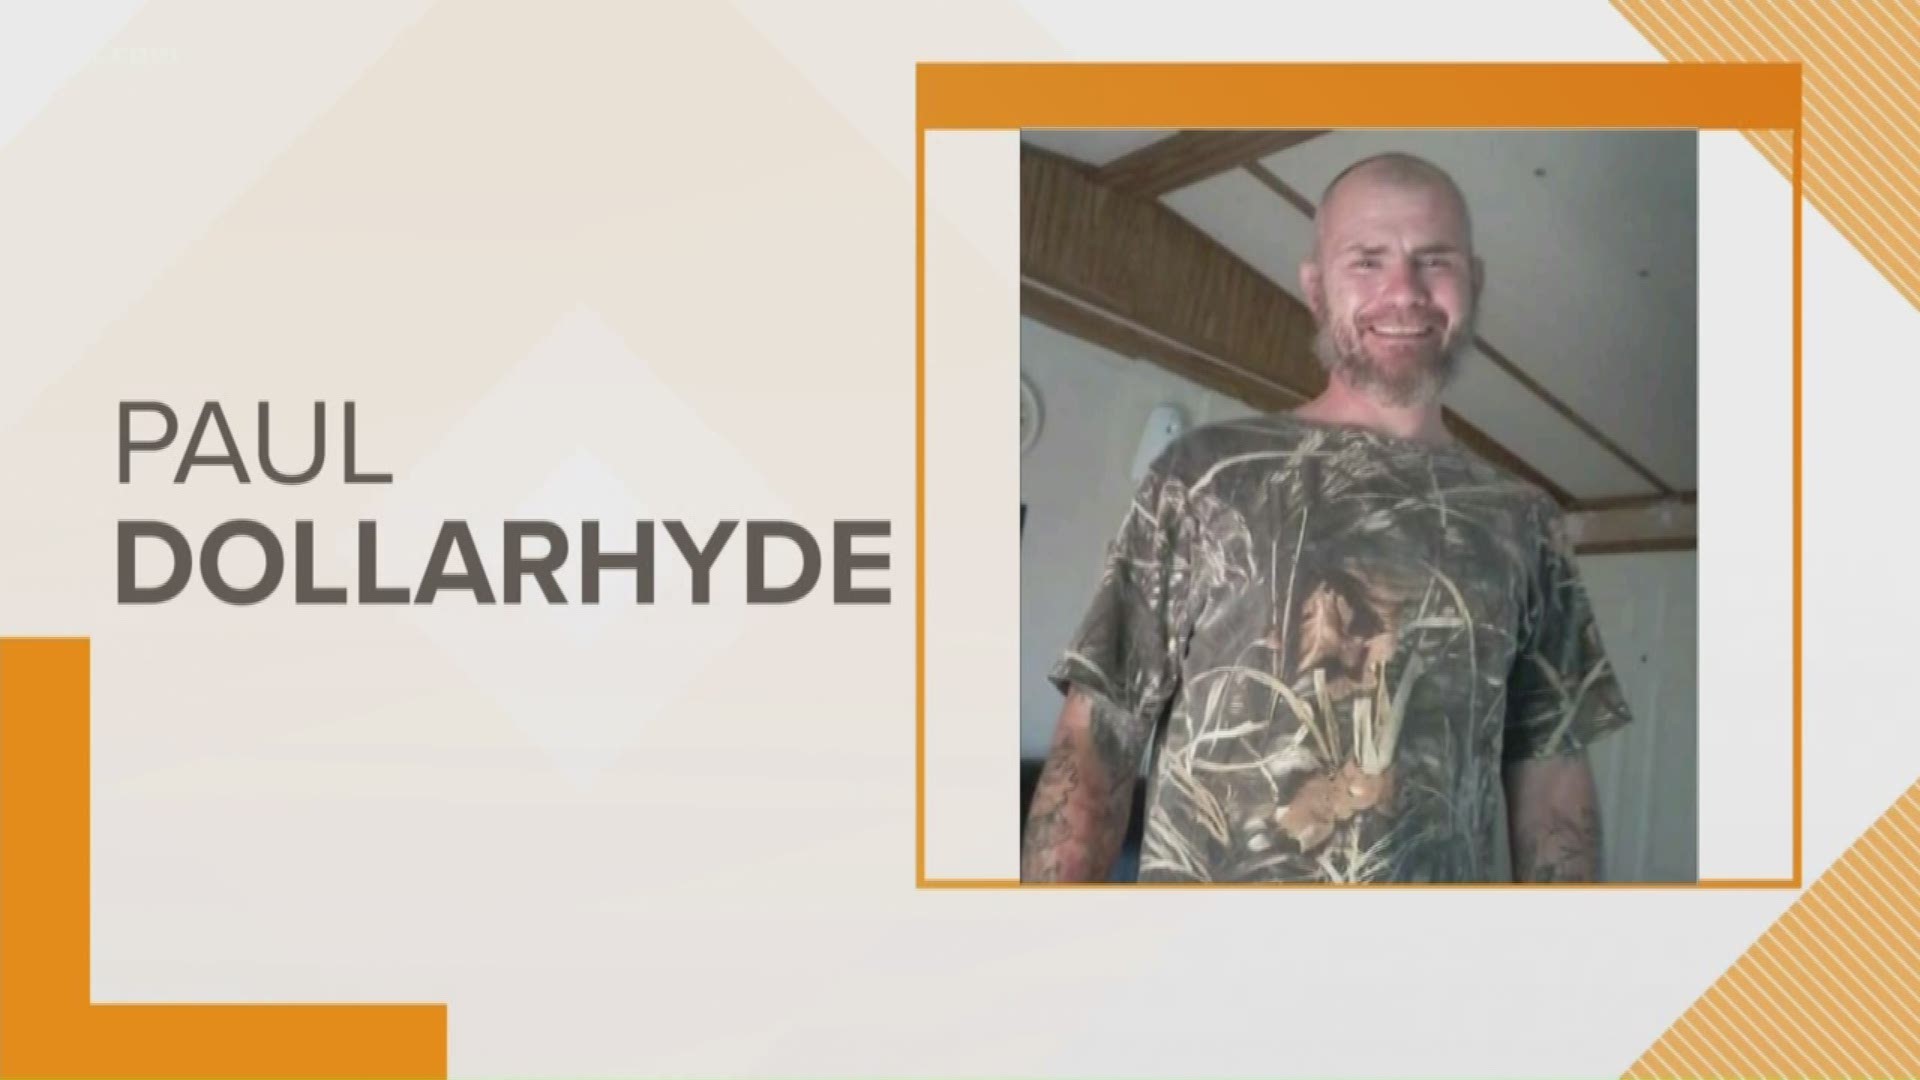 Kershaw County deputies said Paul Dollarhyde was found dead Thursday evening in the woods near his home.